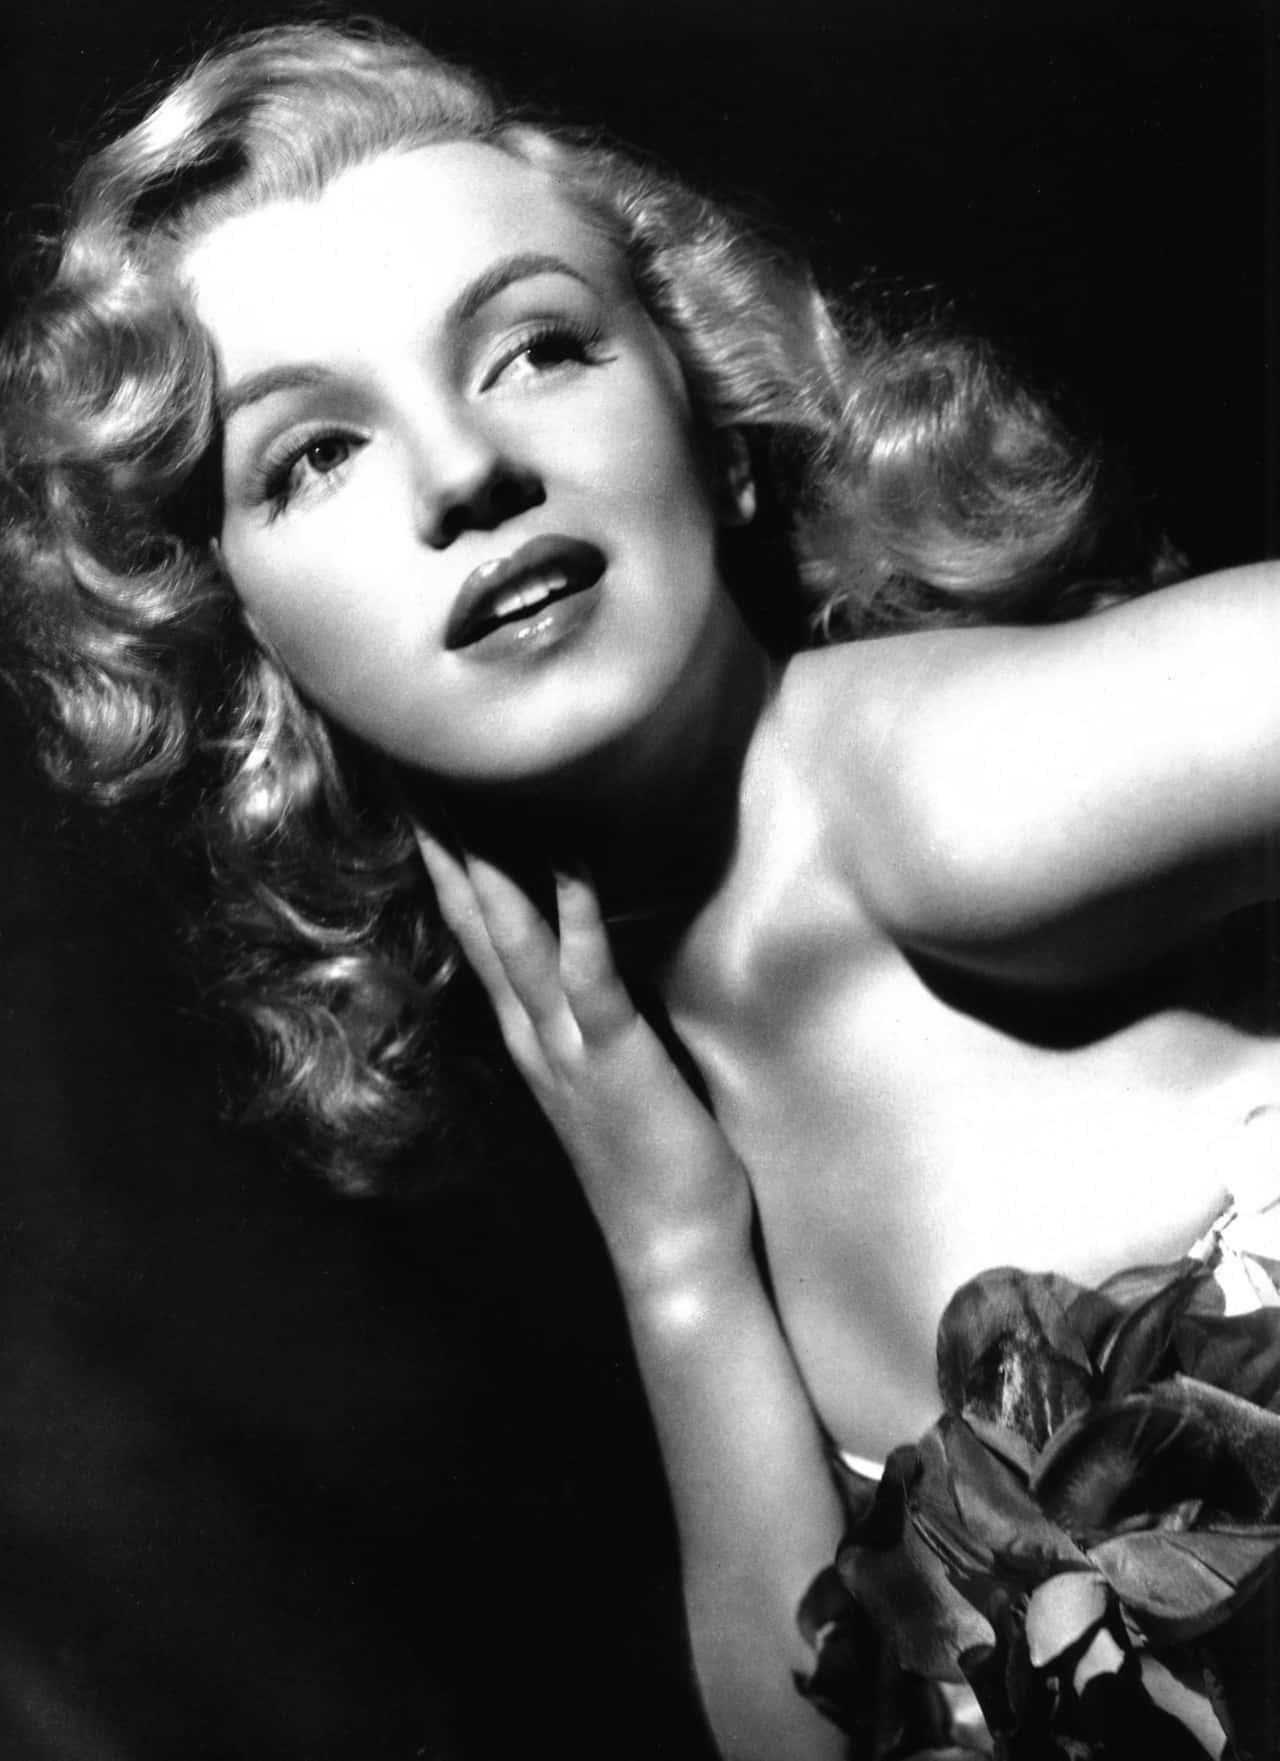 Legendary Hollywood actor, Marilyn Monroe, in her iconic role.